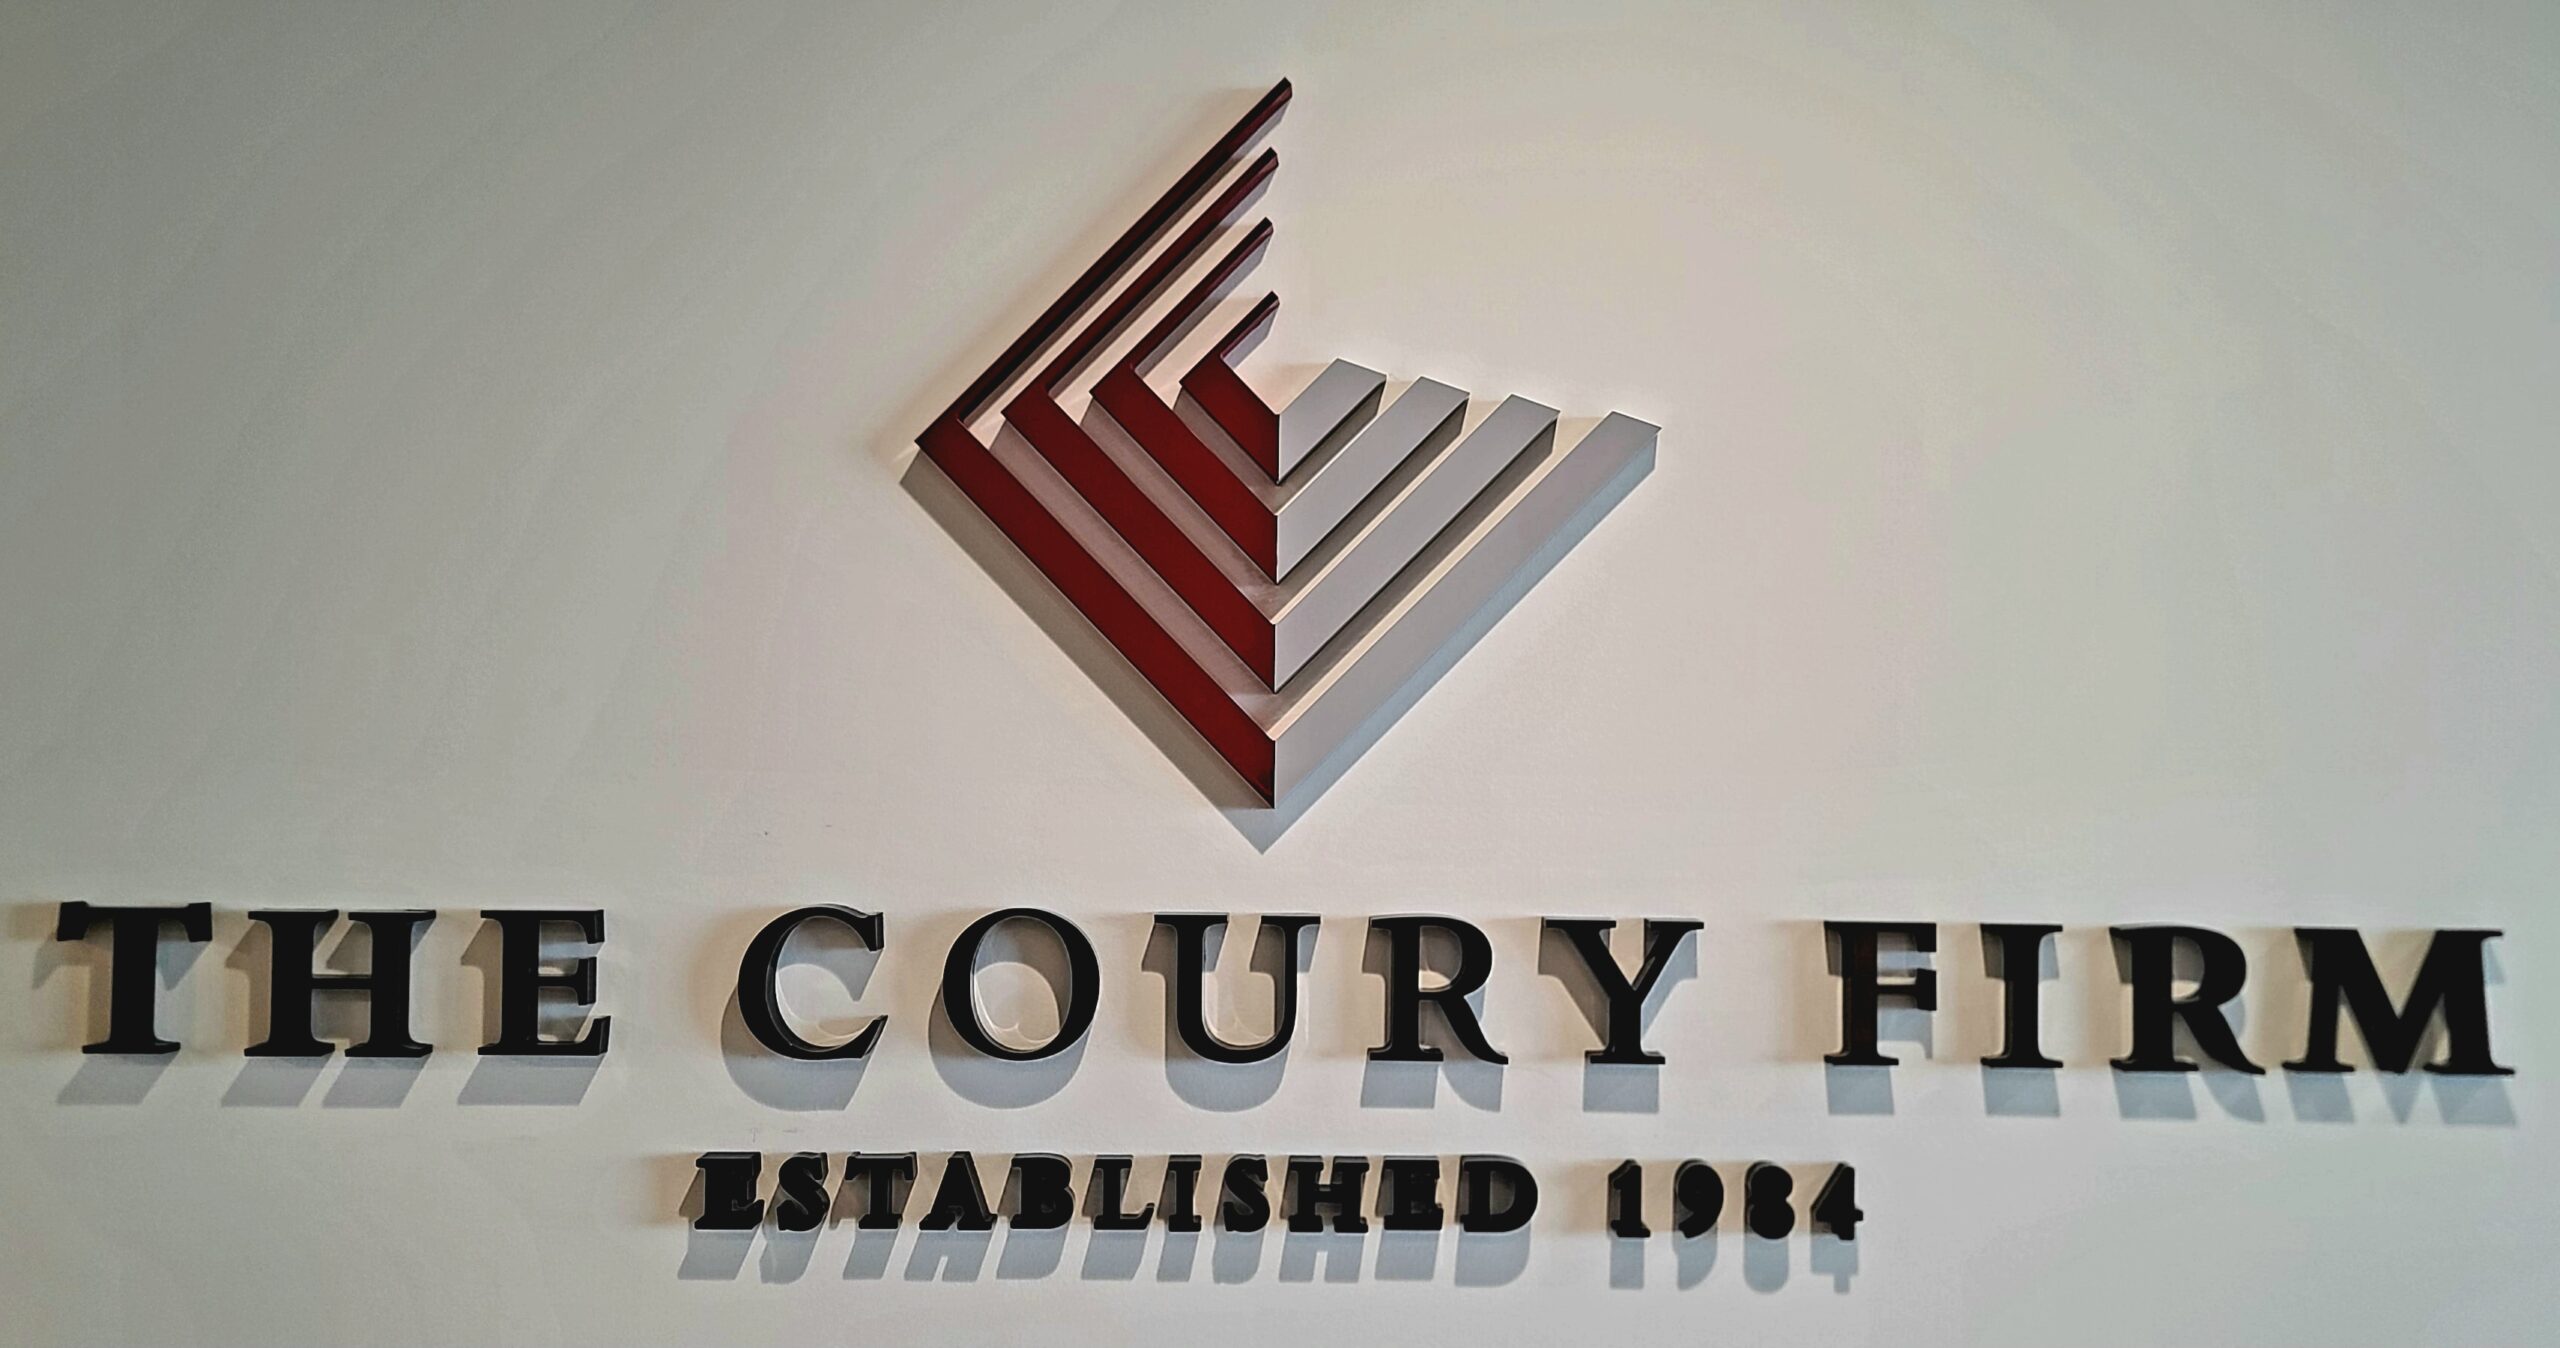 You are currently viewing Coury Firm 2 Lobby Signs Los Angeles